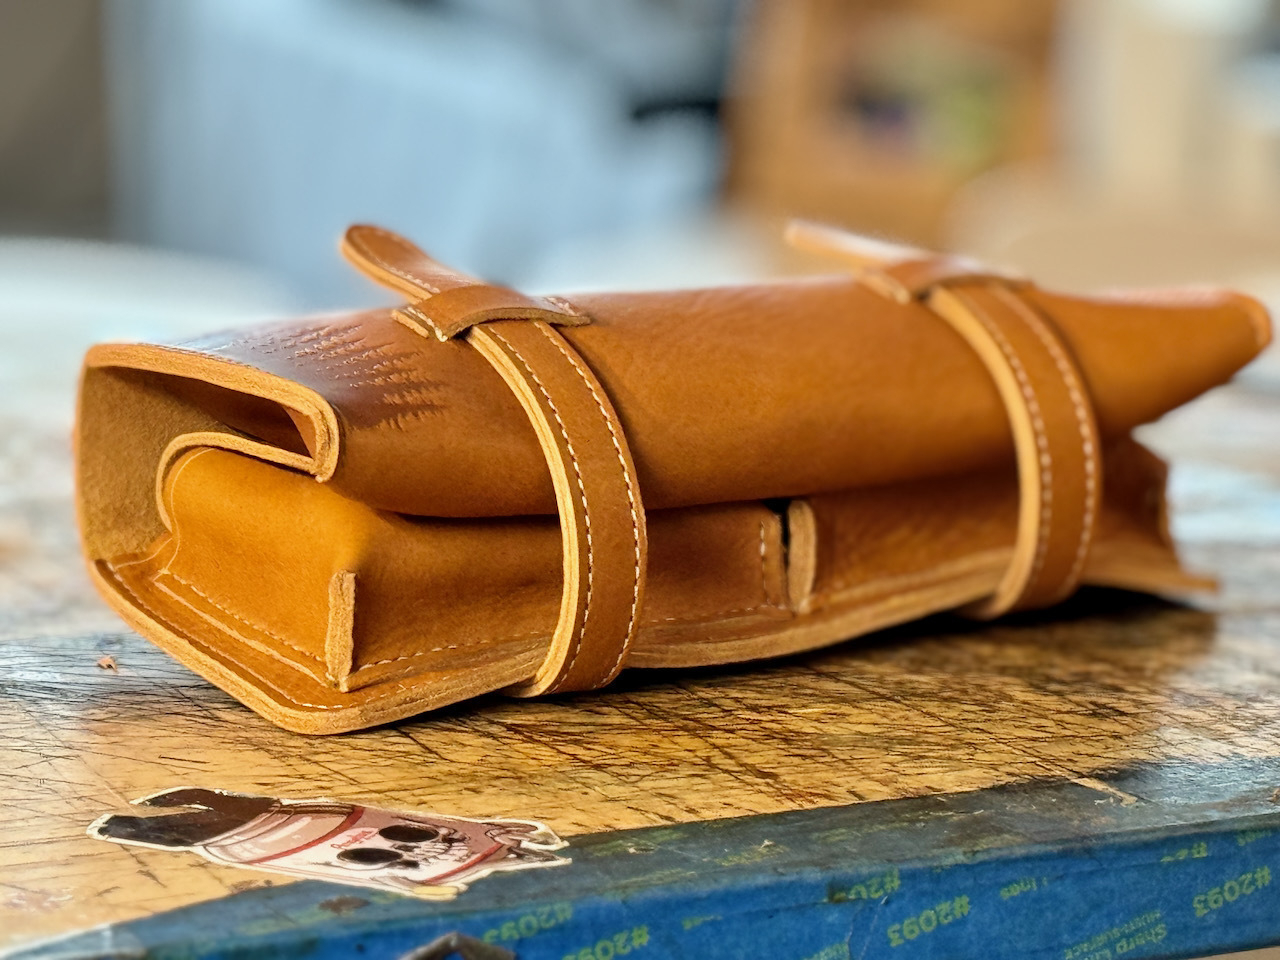 The leather boveda cigar case shown closed. Two long straps from the back tuck under loops on the front of the case to keep it securely closed. pine tree engraving is visible on the bottom of the front.